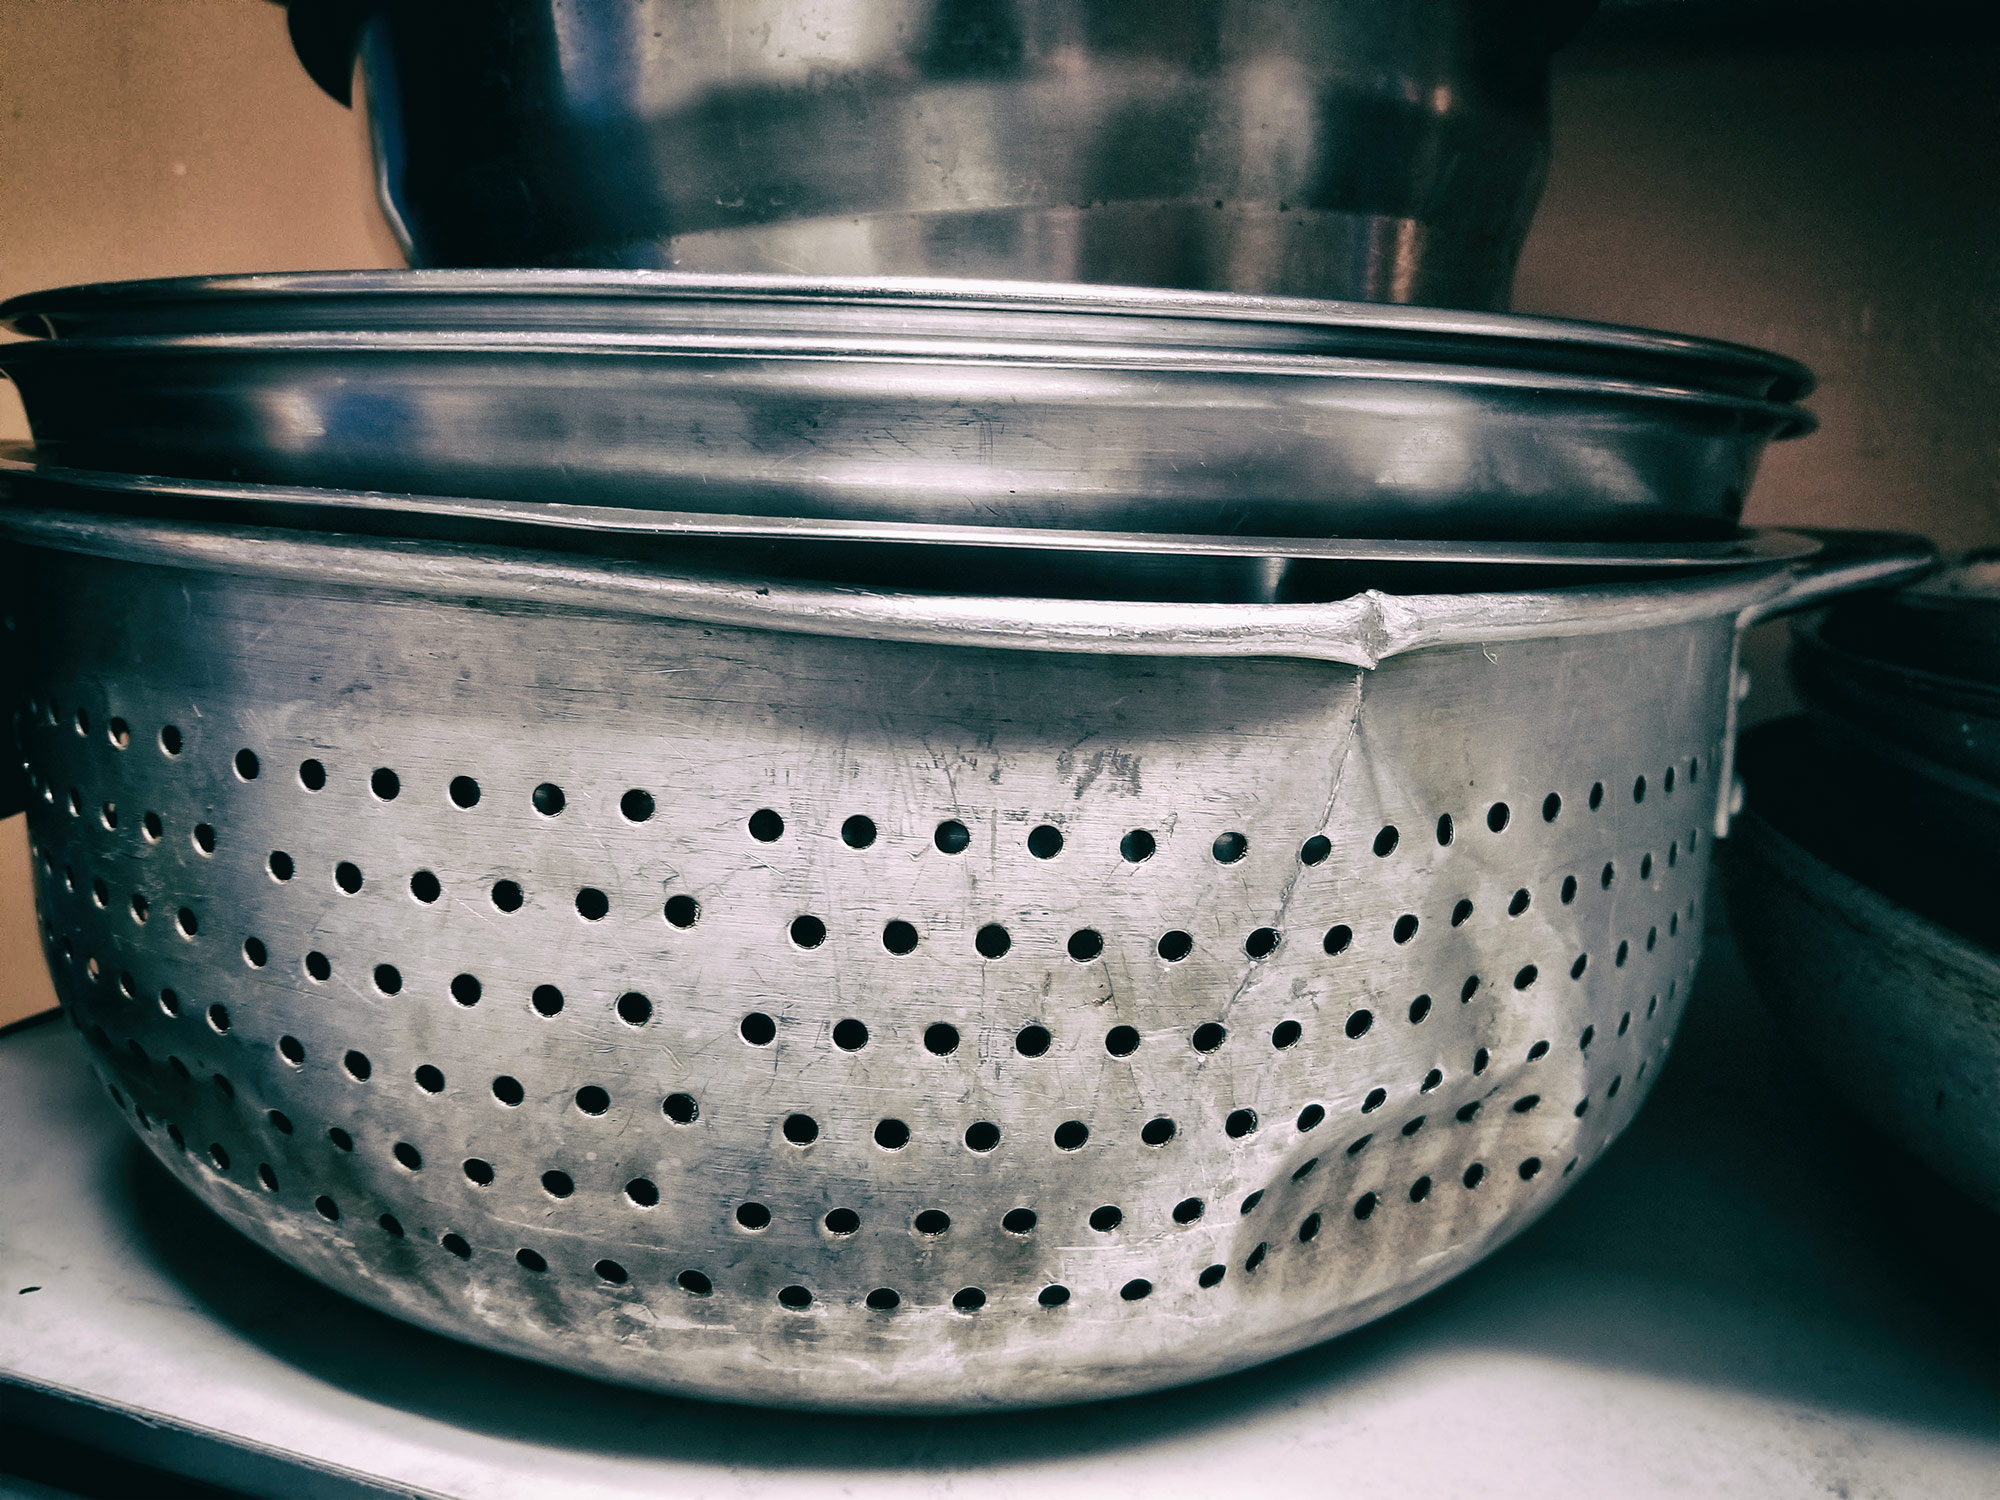  collander and mixing bowls ©2018 by bret wills